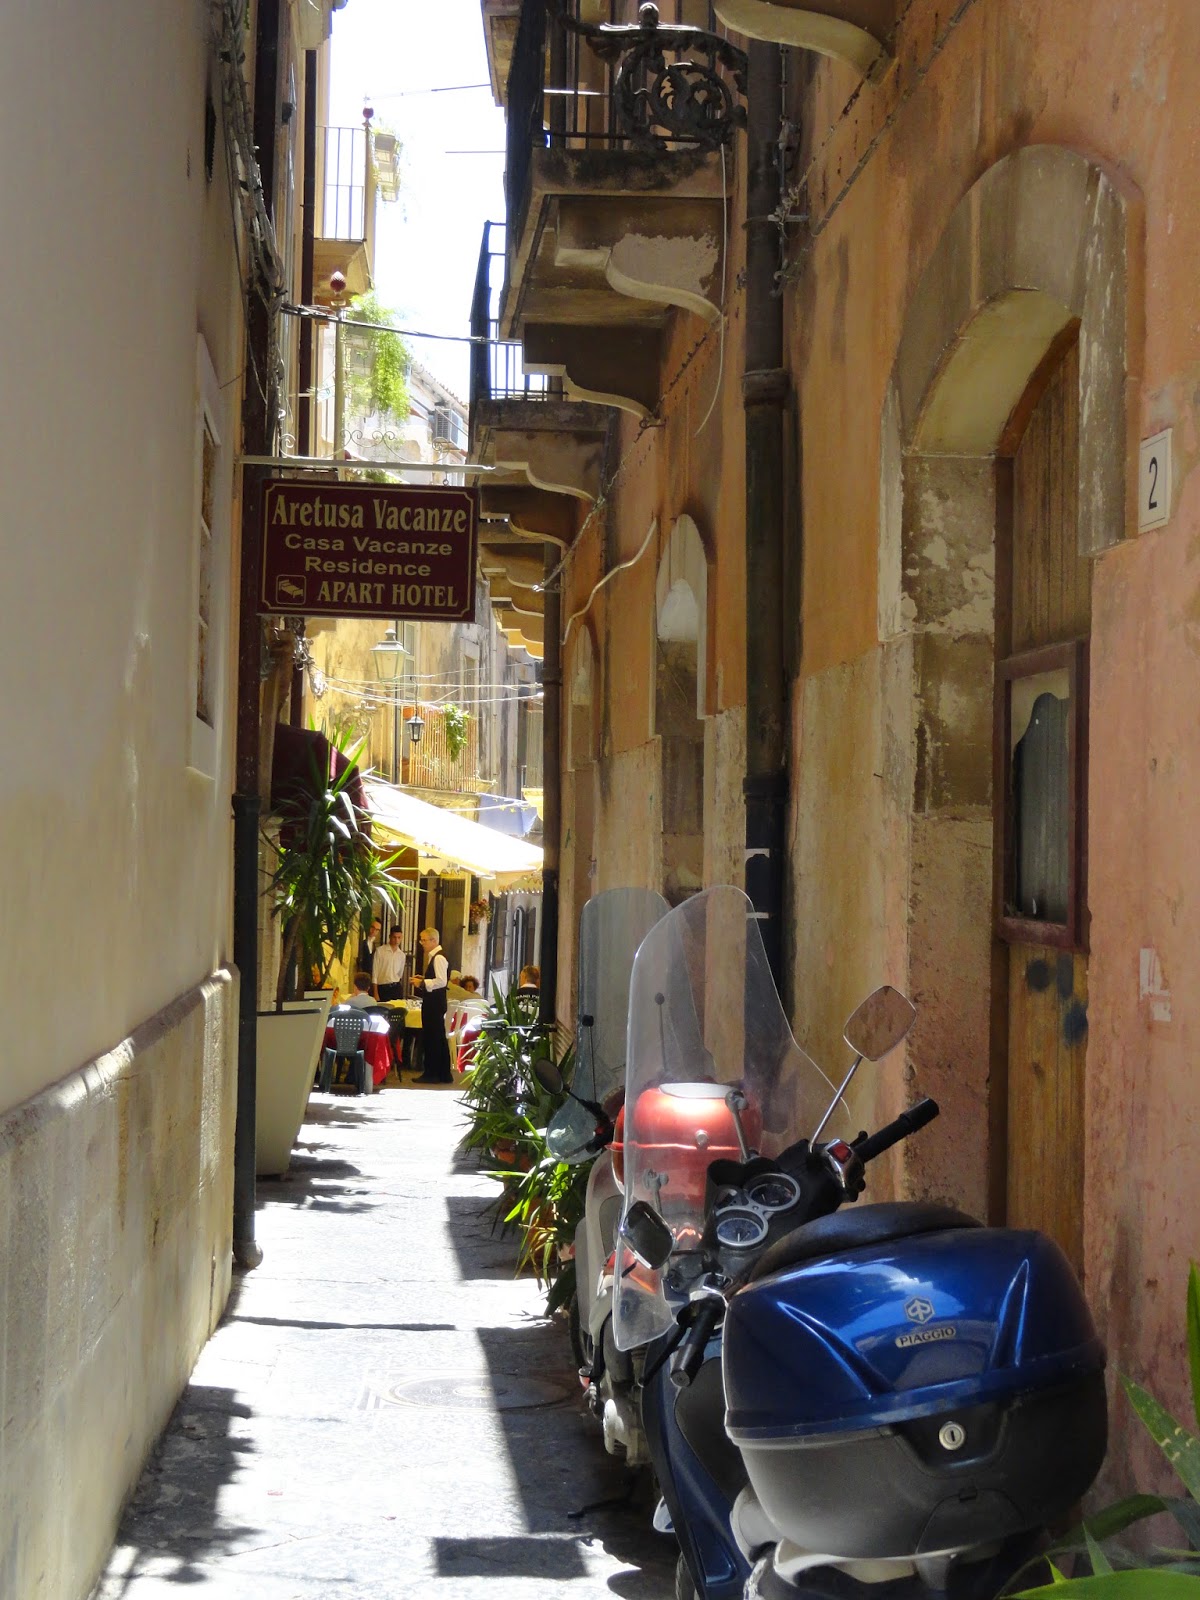 The-Streets-Of-Ortygia-Sicily